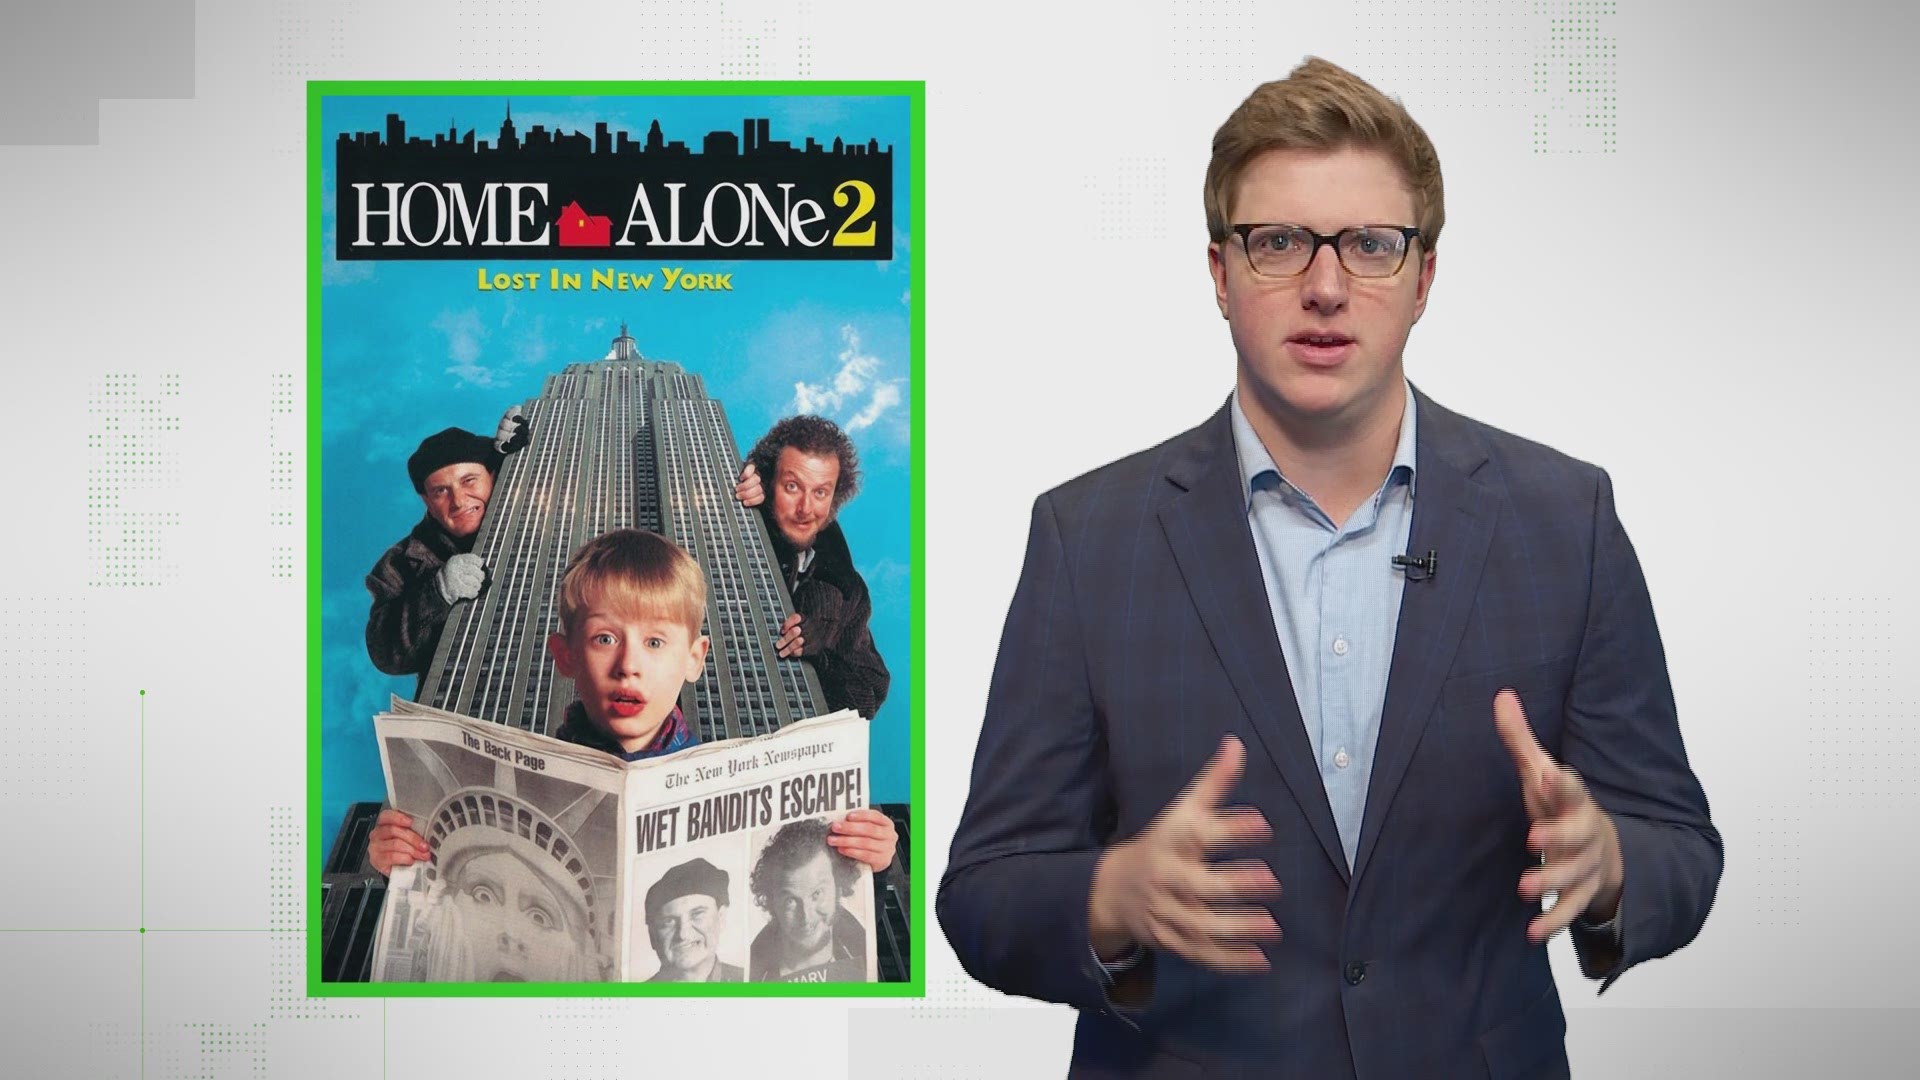 Donald Trump’s 1992 appearance in 'Home Alone 2' was missing when it aired in Canada. Now many are sharing social media claims about why the clip was gone.